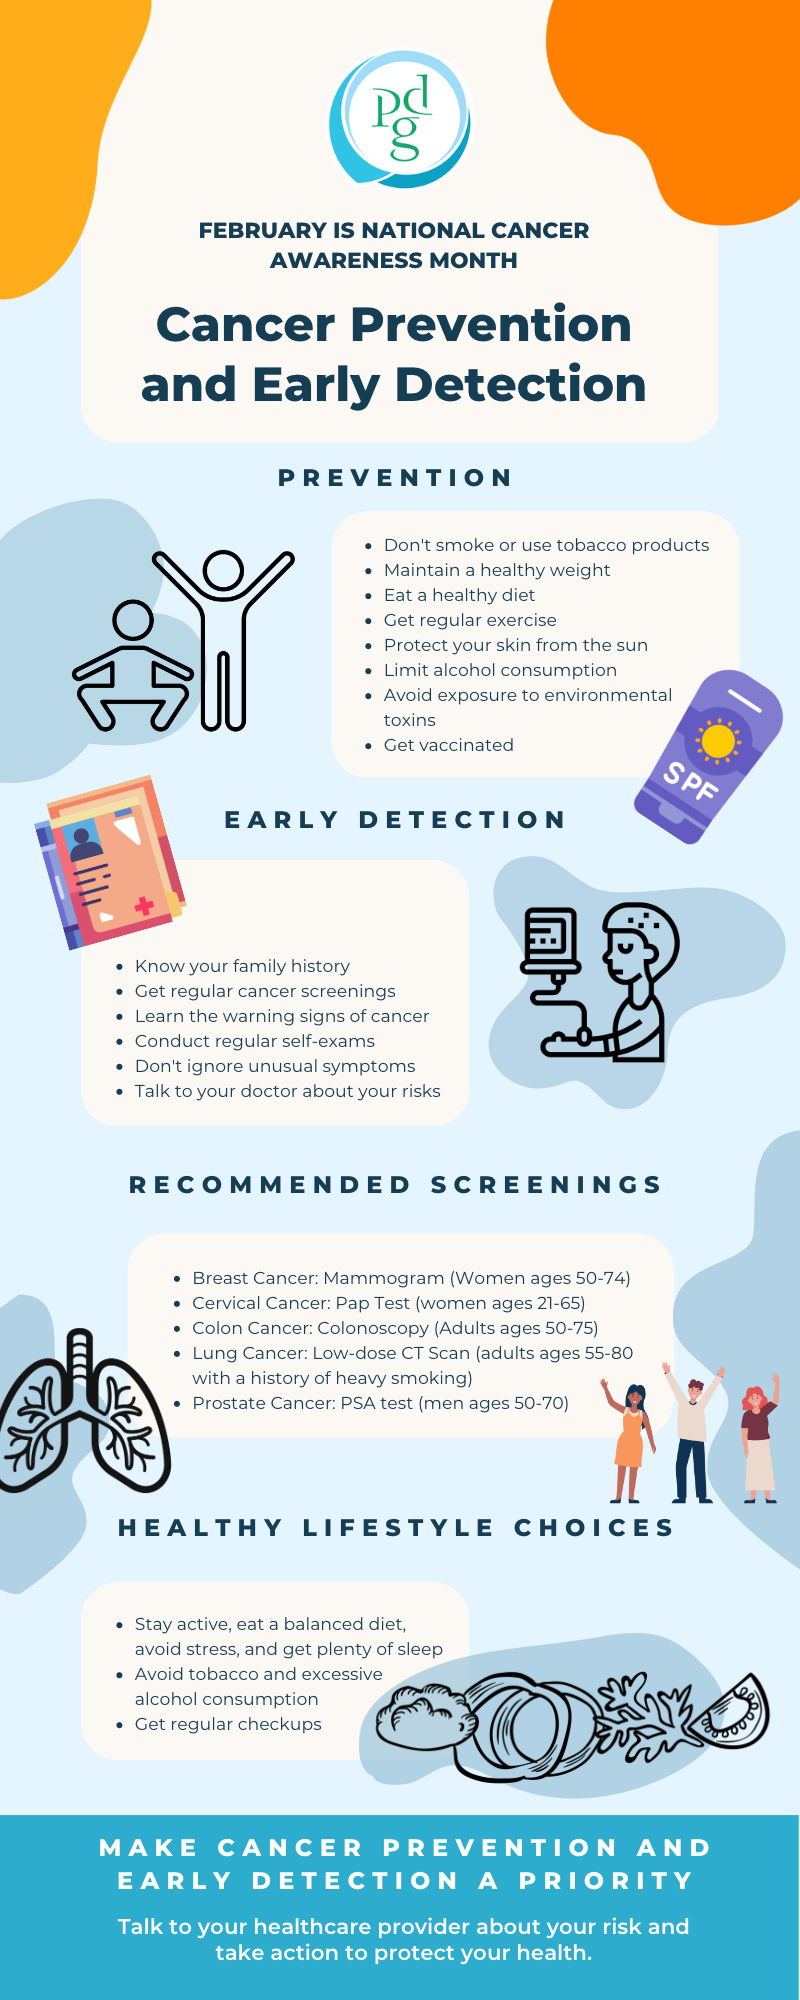 Cancer Prevention and Early Detection Infographic